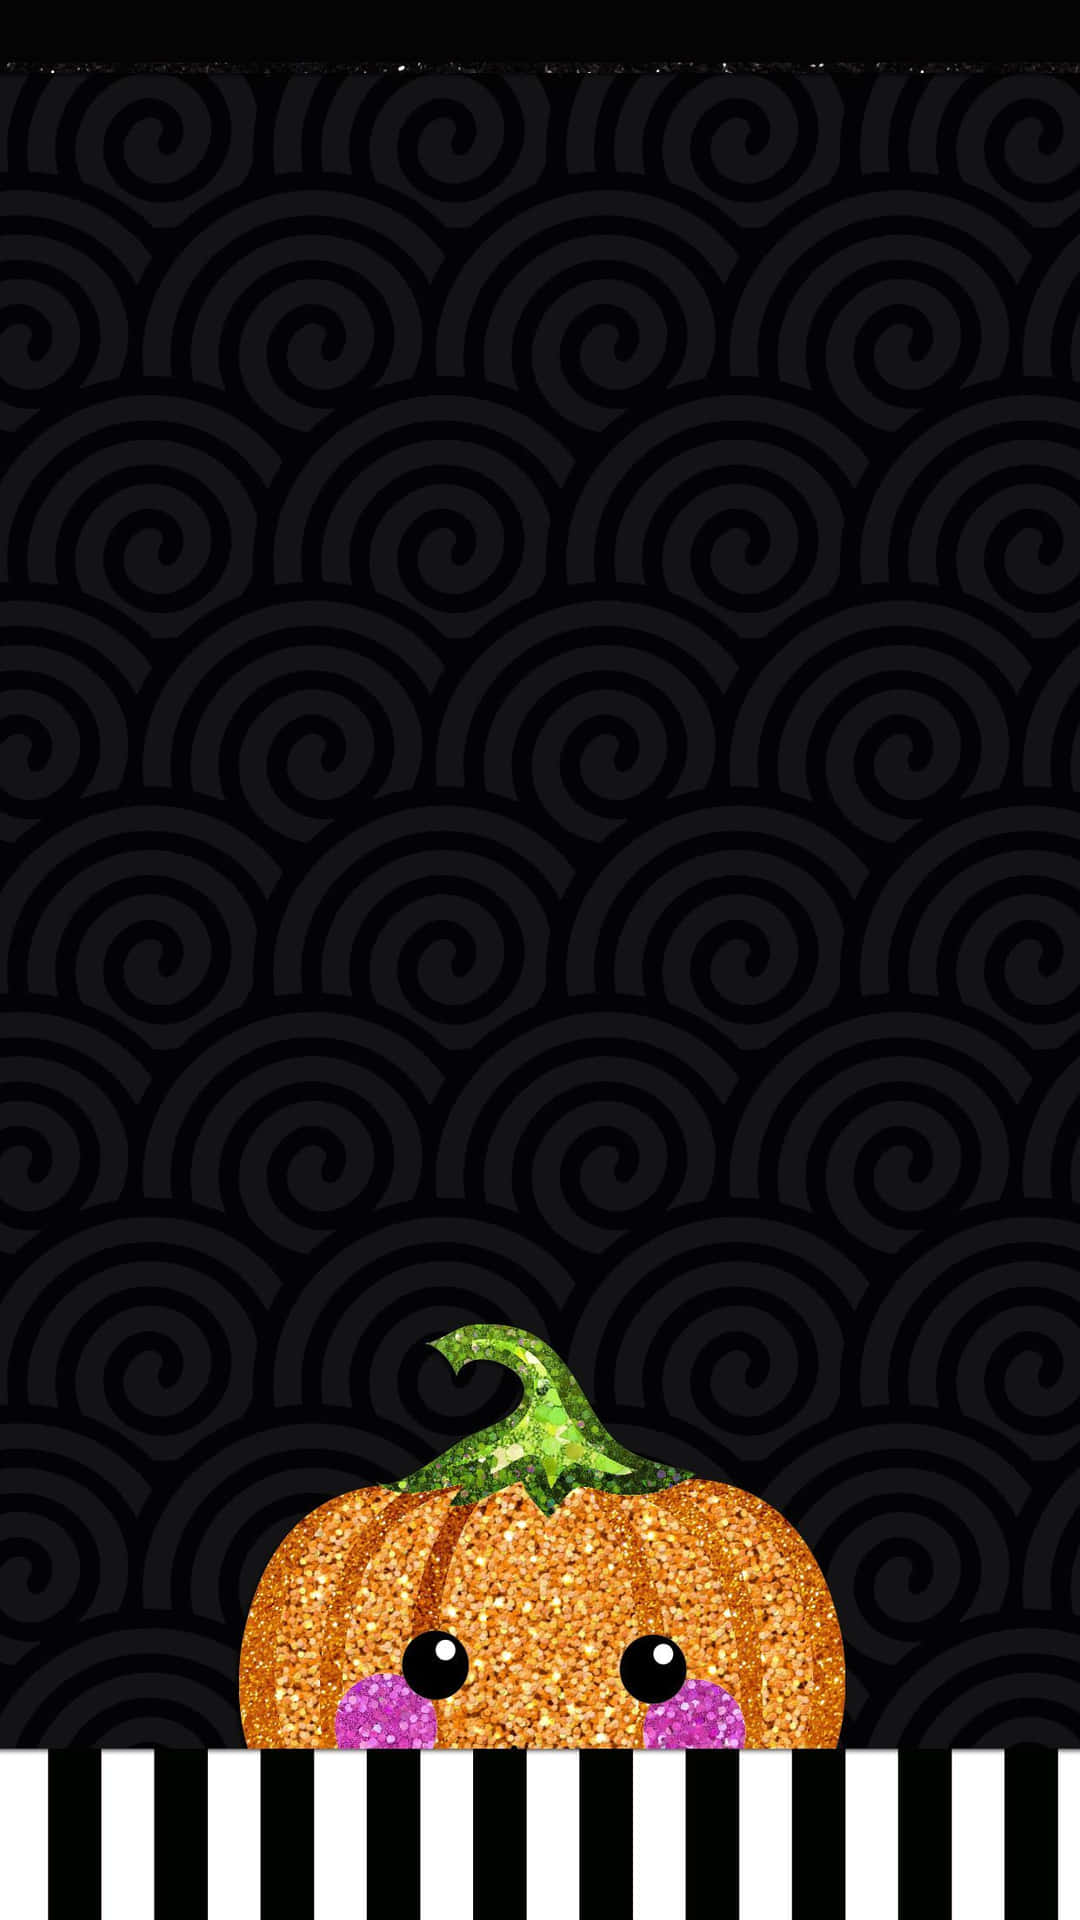 Celebrate Halloween with this adorable Iphone wallpaper!